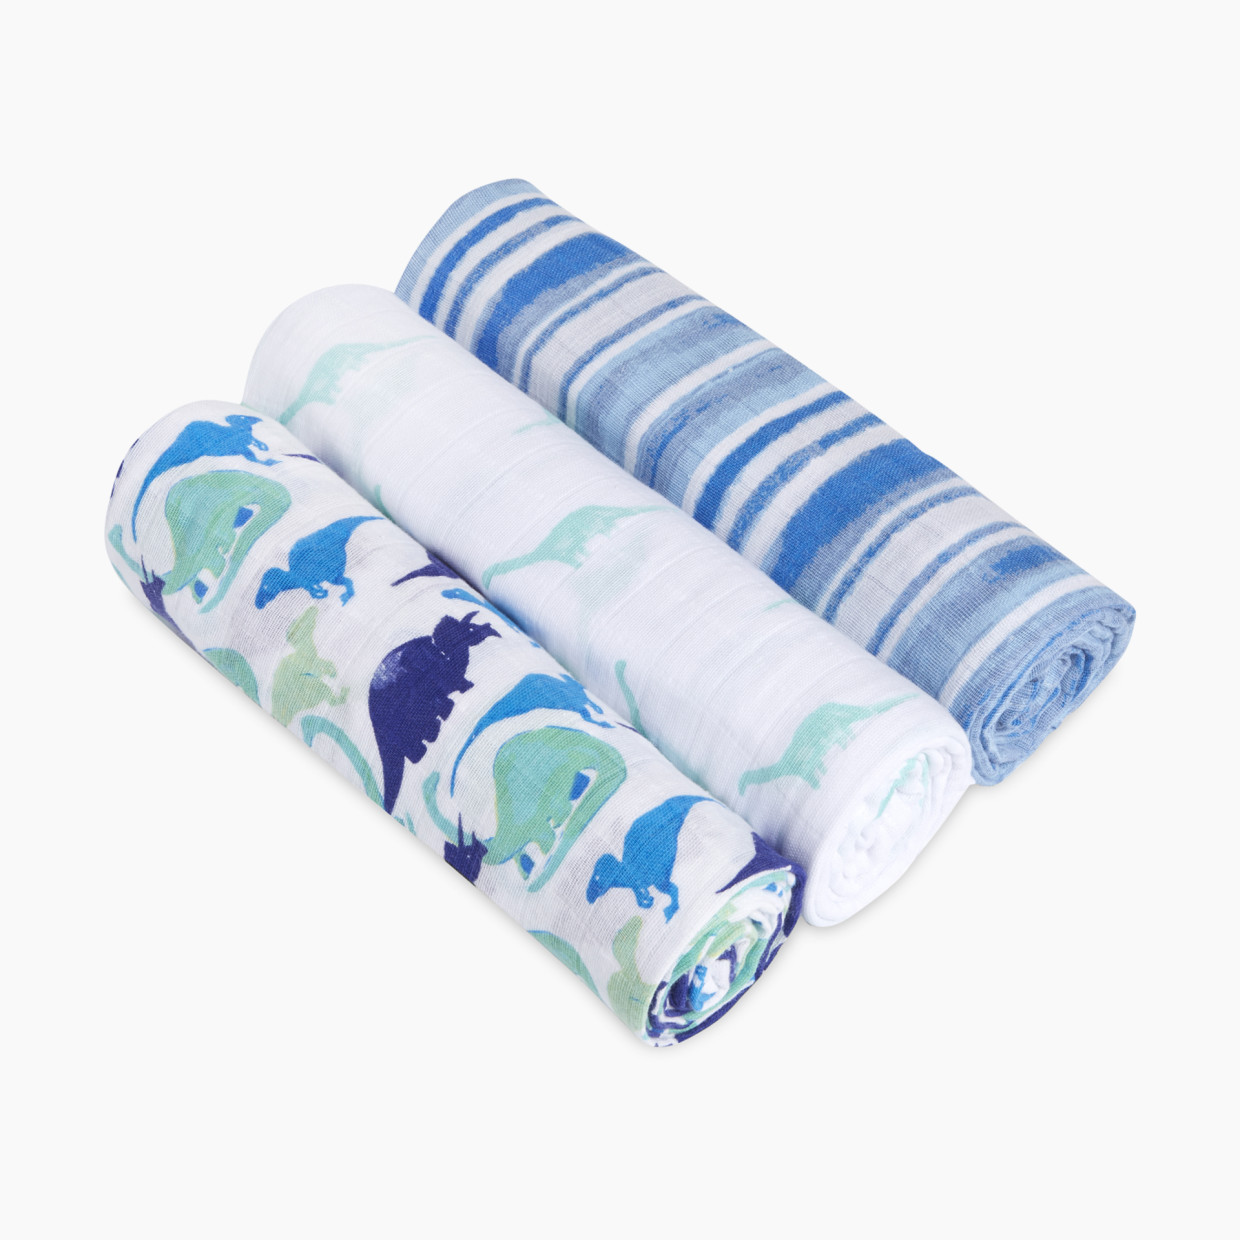 Aden + Anais White Label Swaddle (3 Pack) - Jurassic.